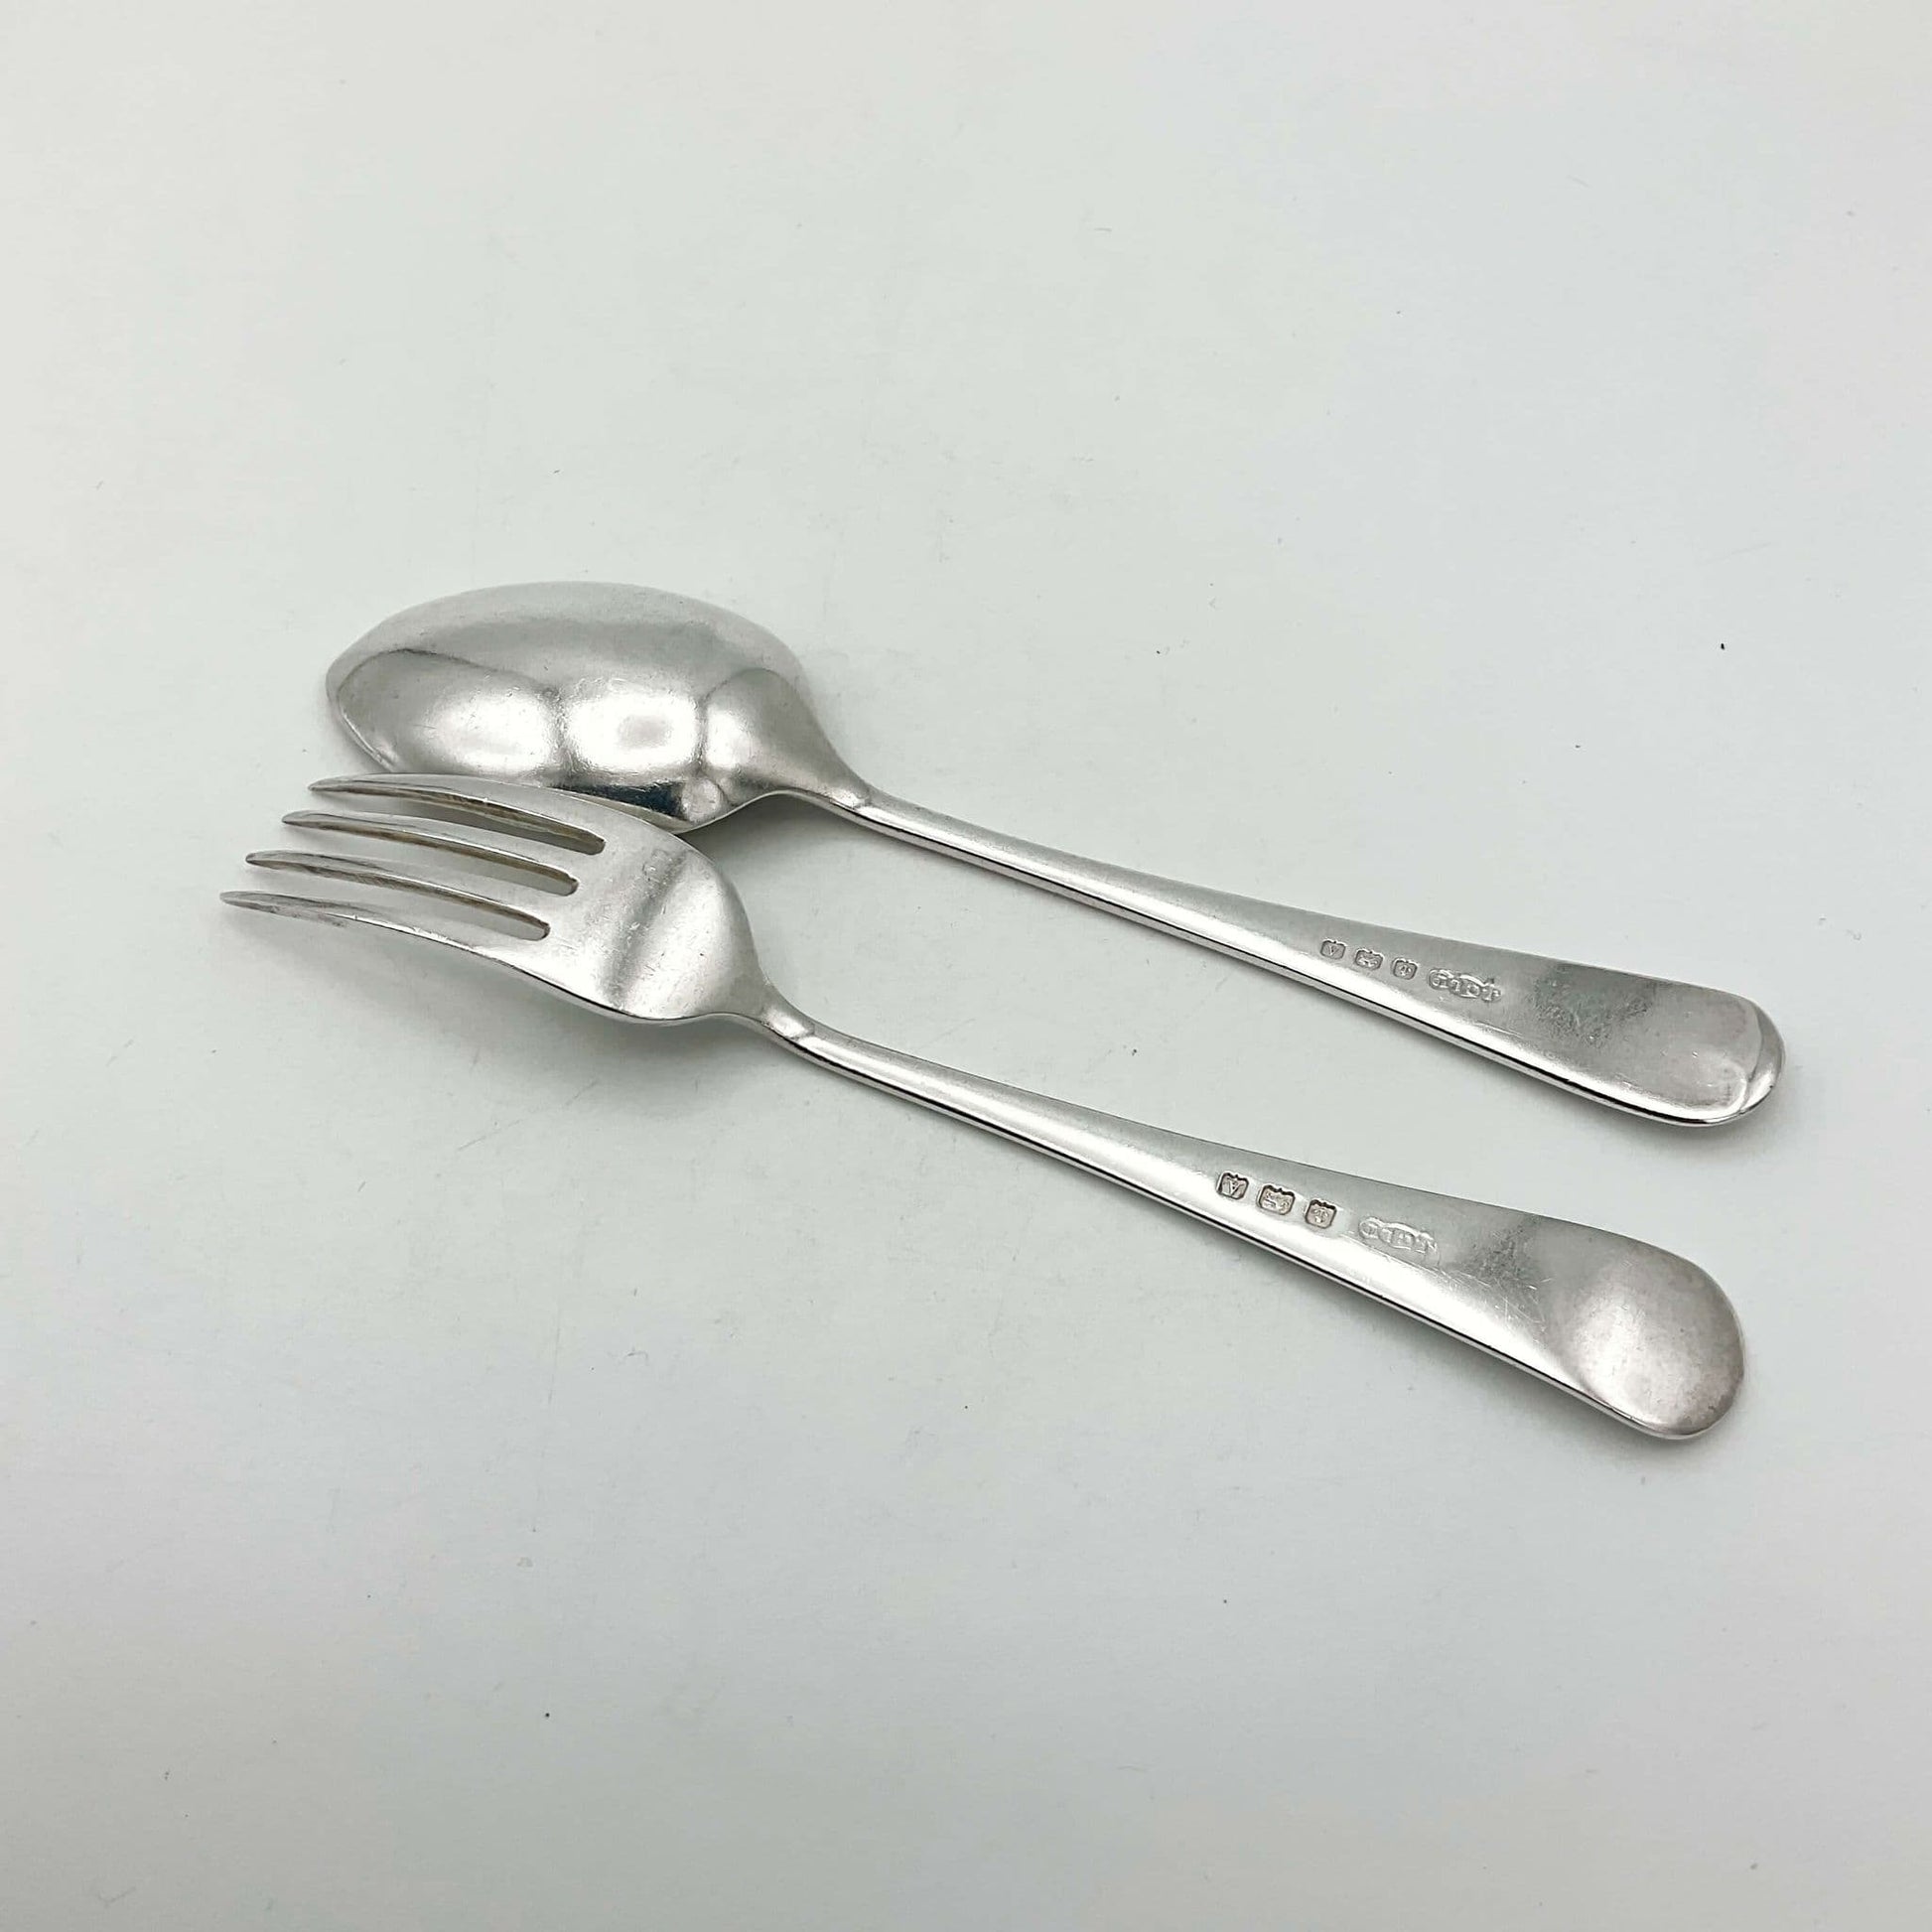  Silver spoon and for upside down on white surface